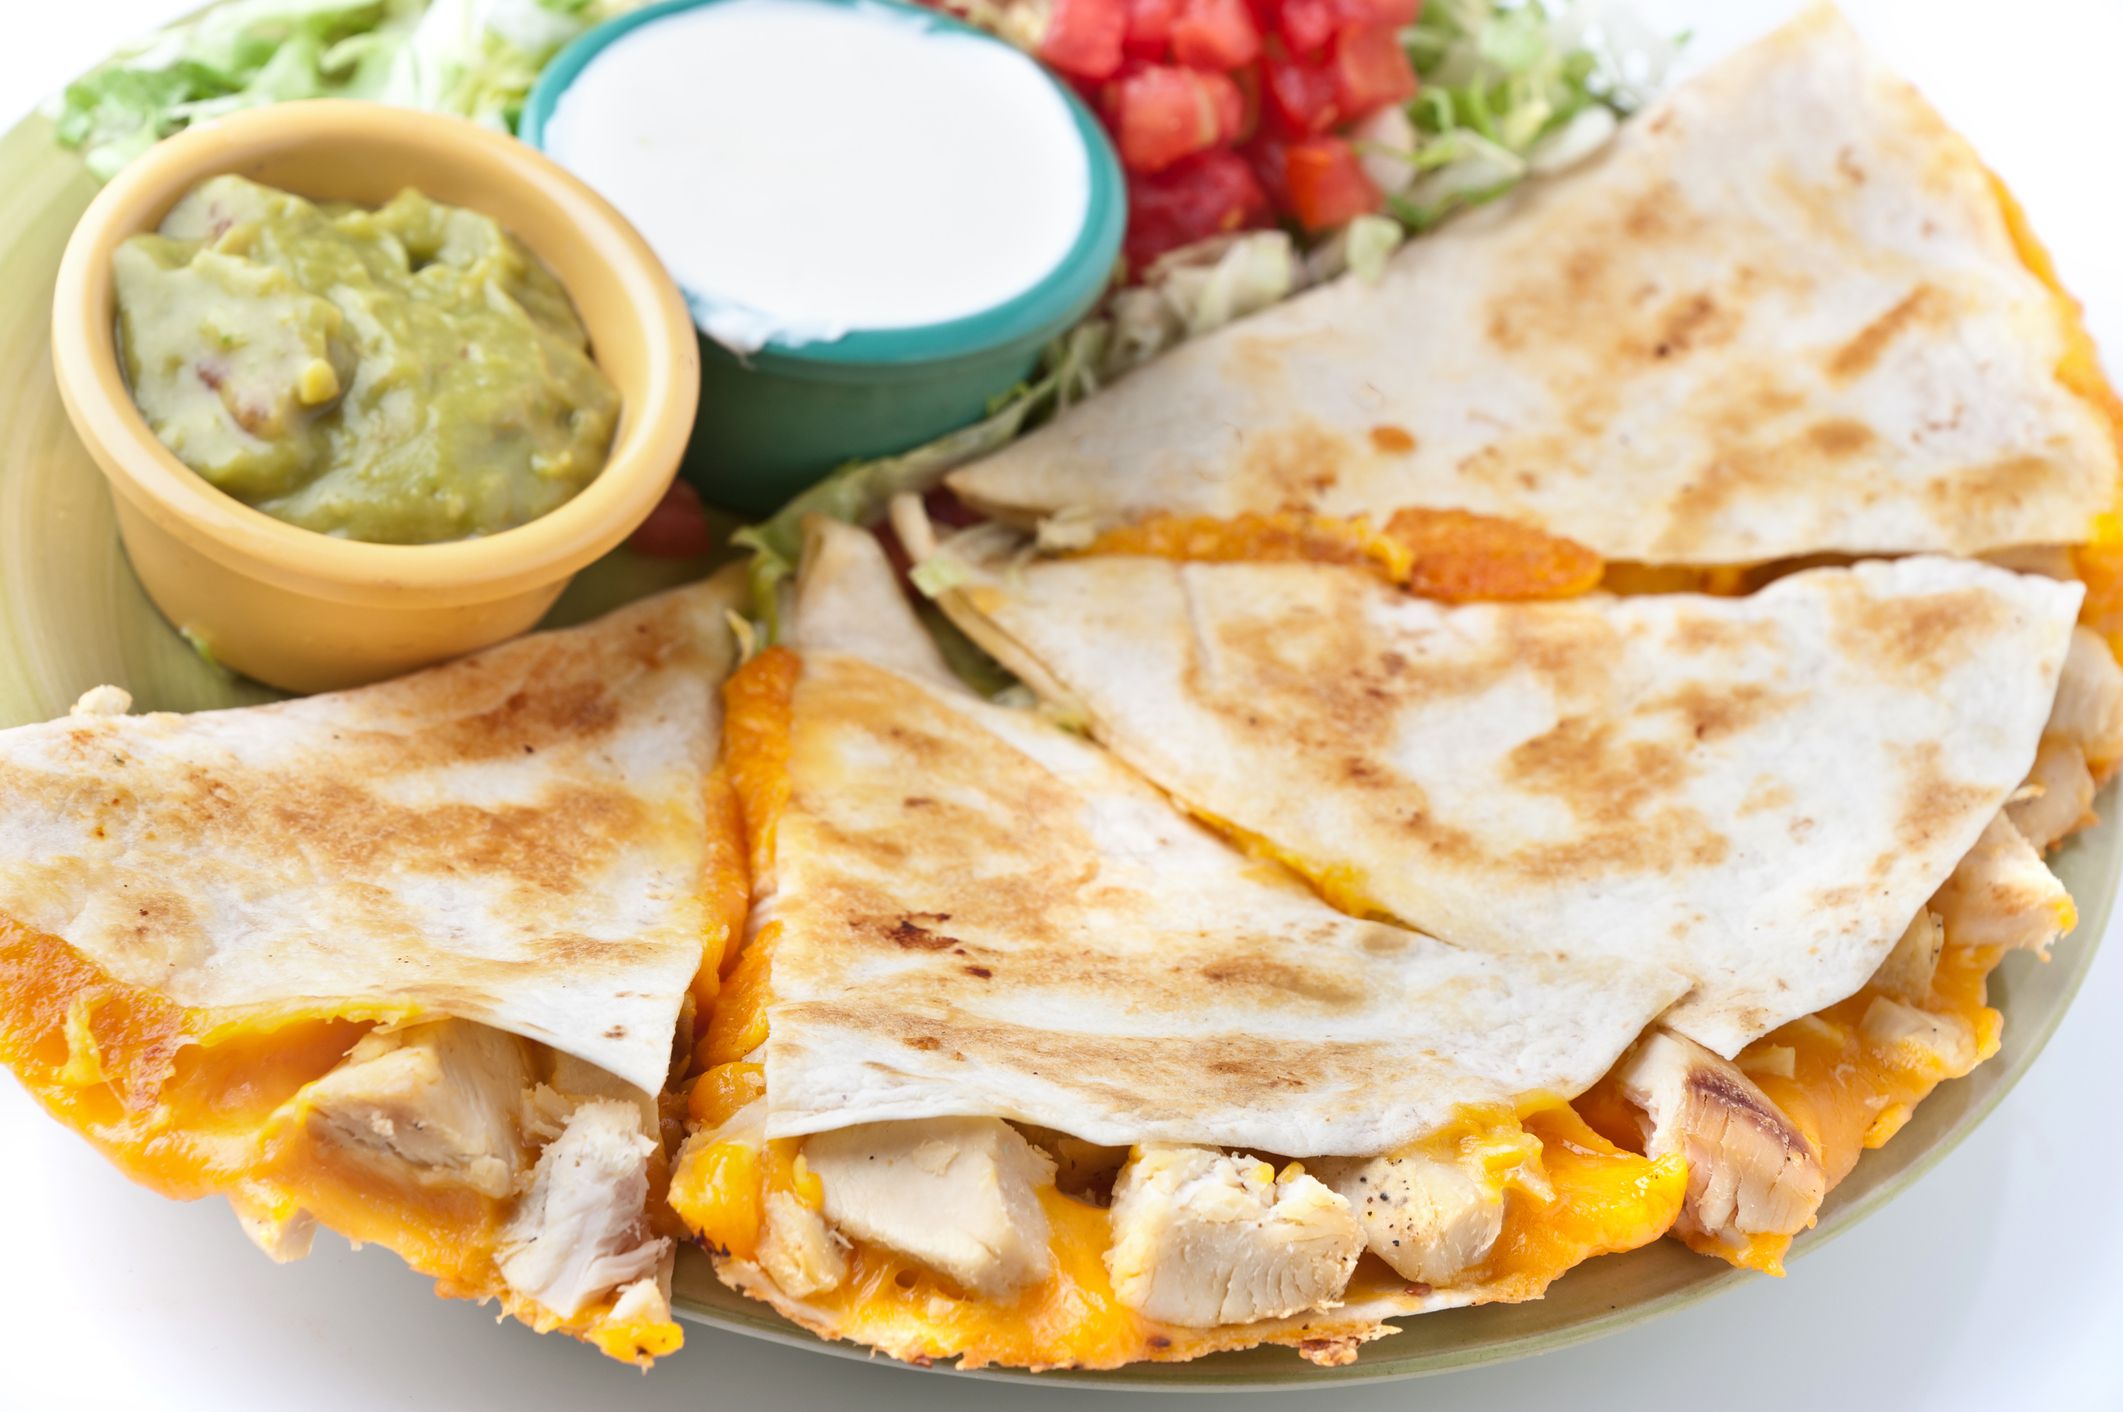 Chicken Quesadillas Recipe - How to Use Your Leftovers